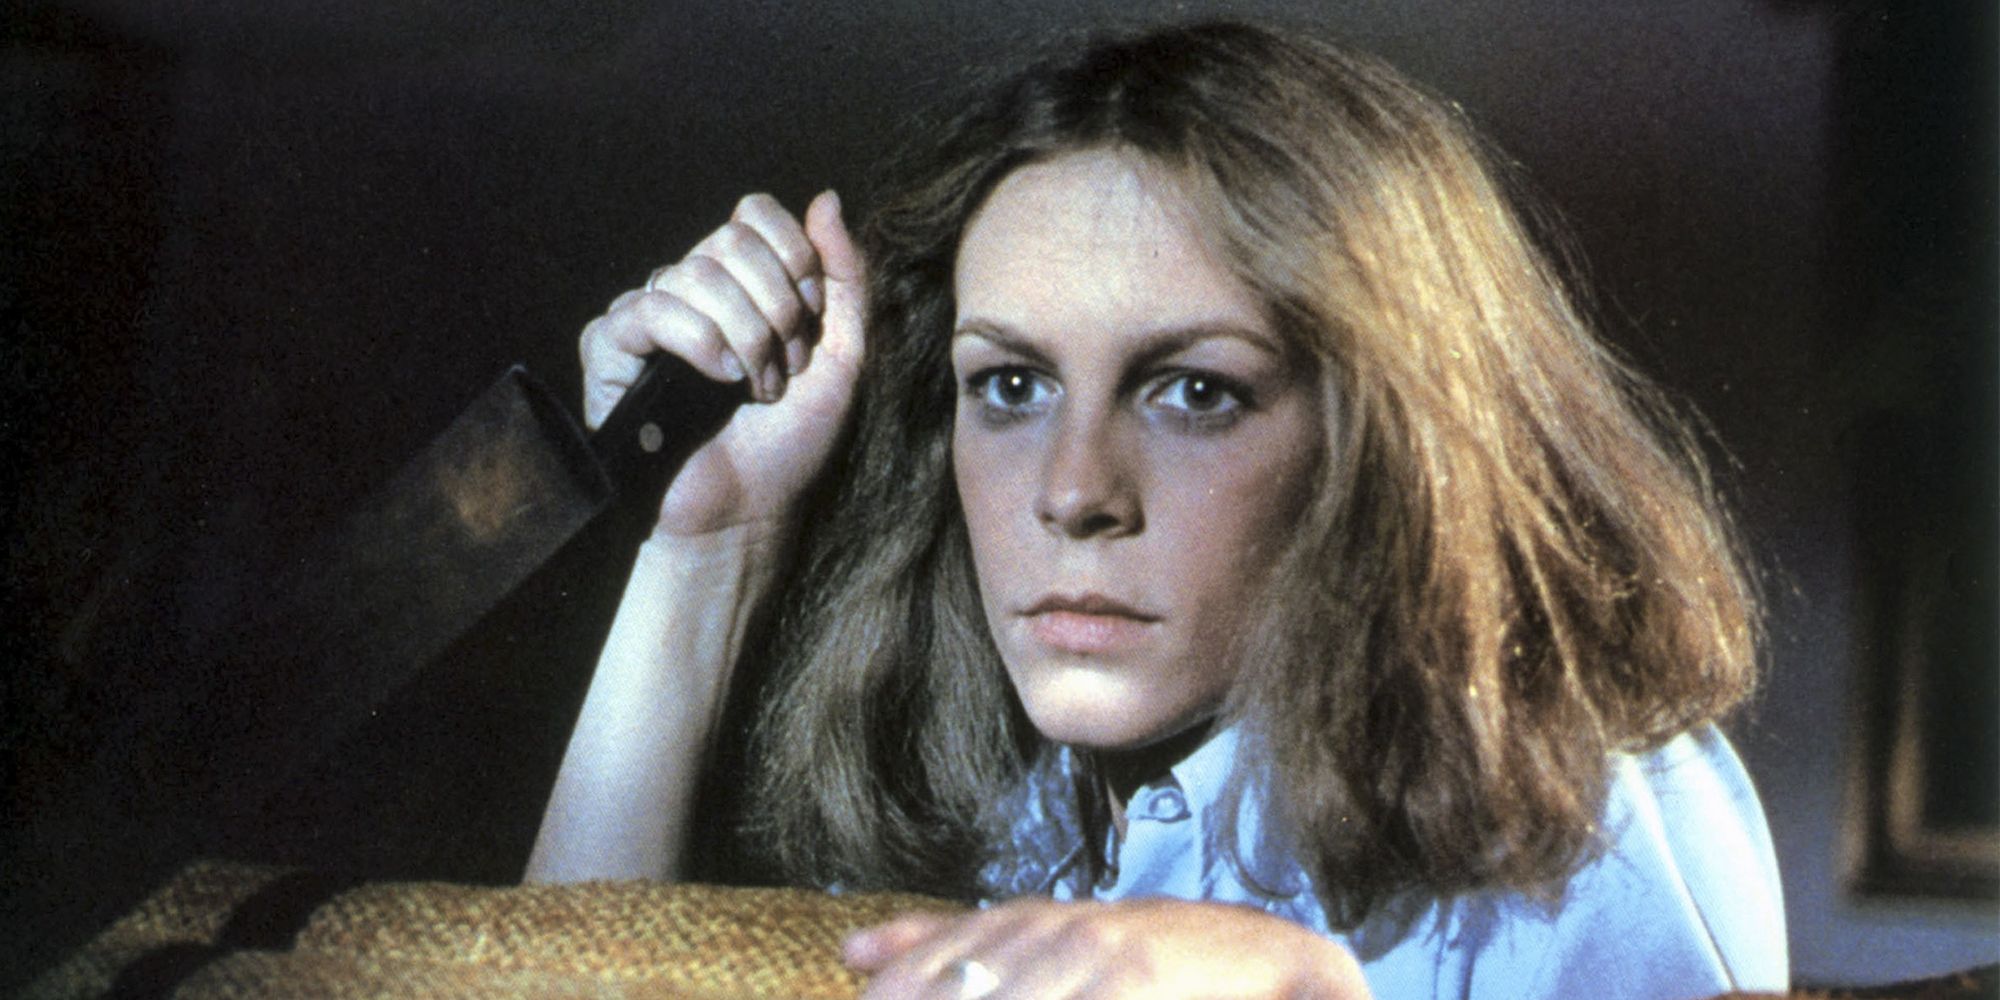 Jamie Lee Curtis holding a knife in 'Halloween' (1978)